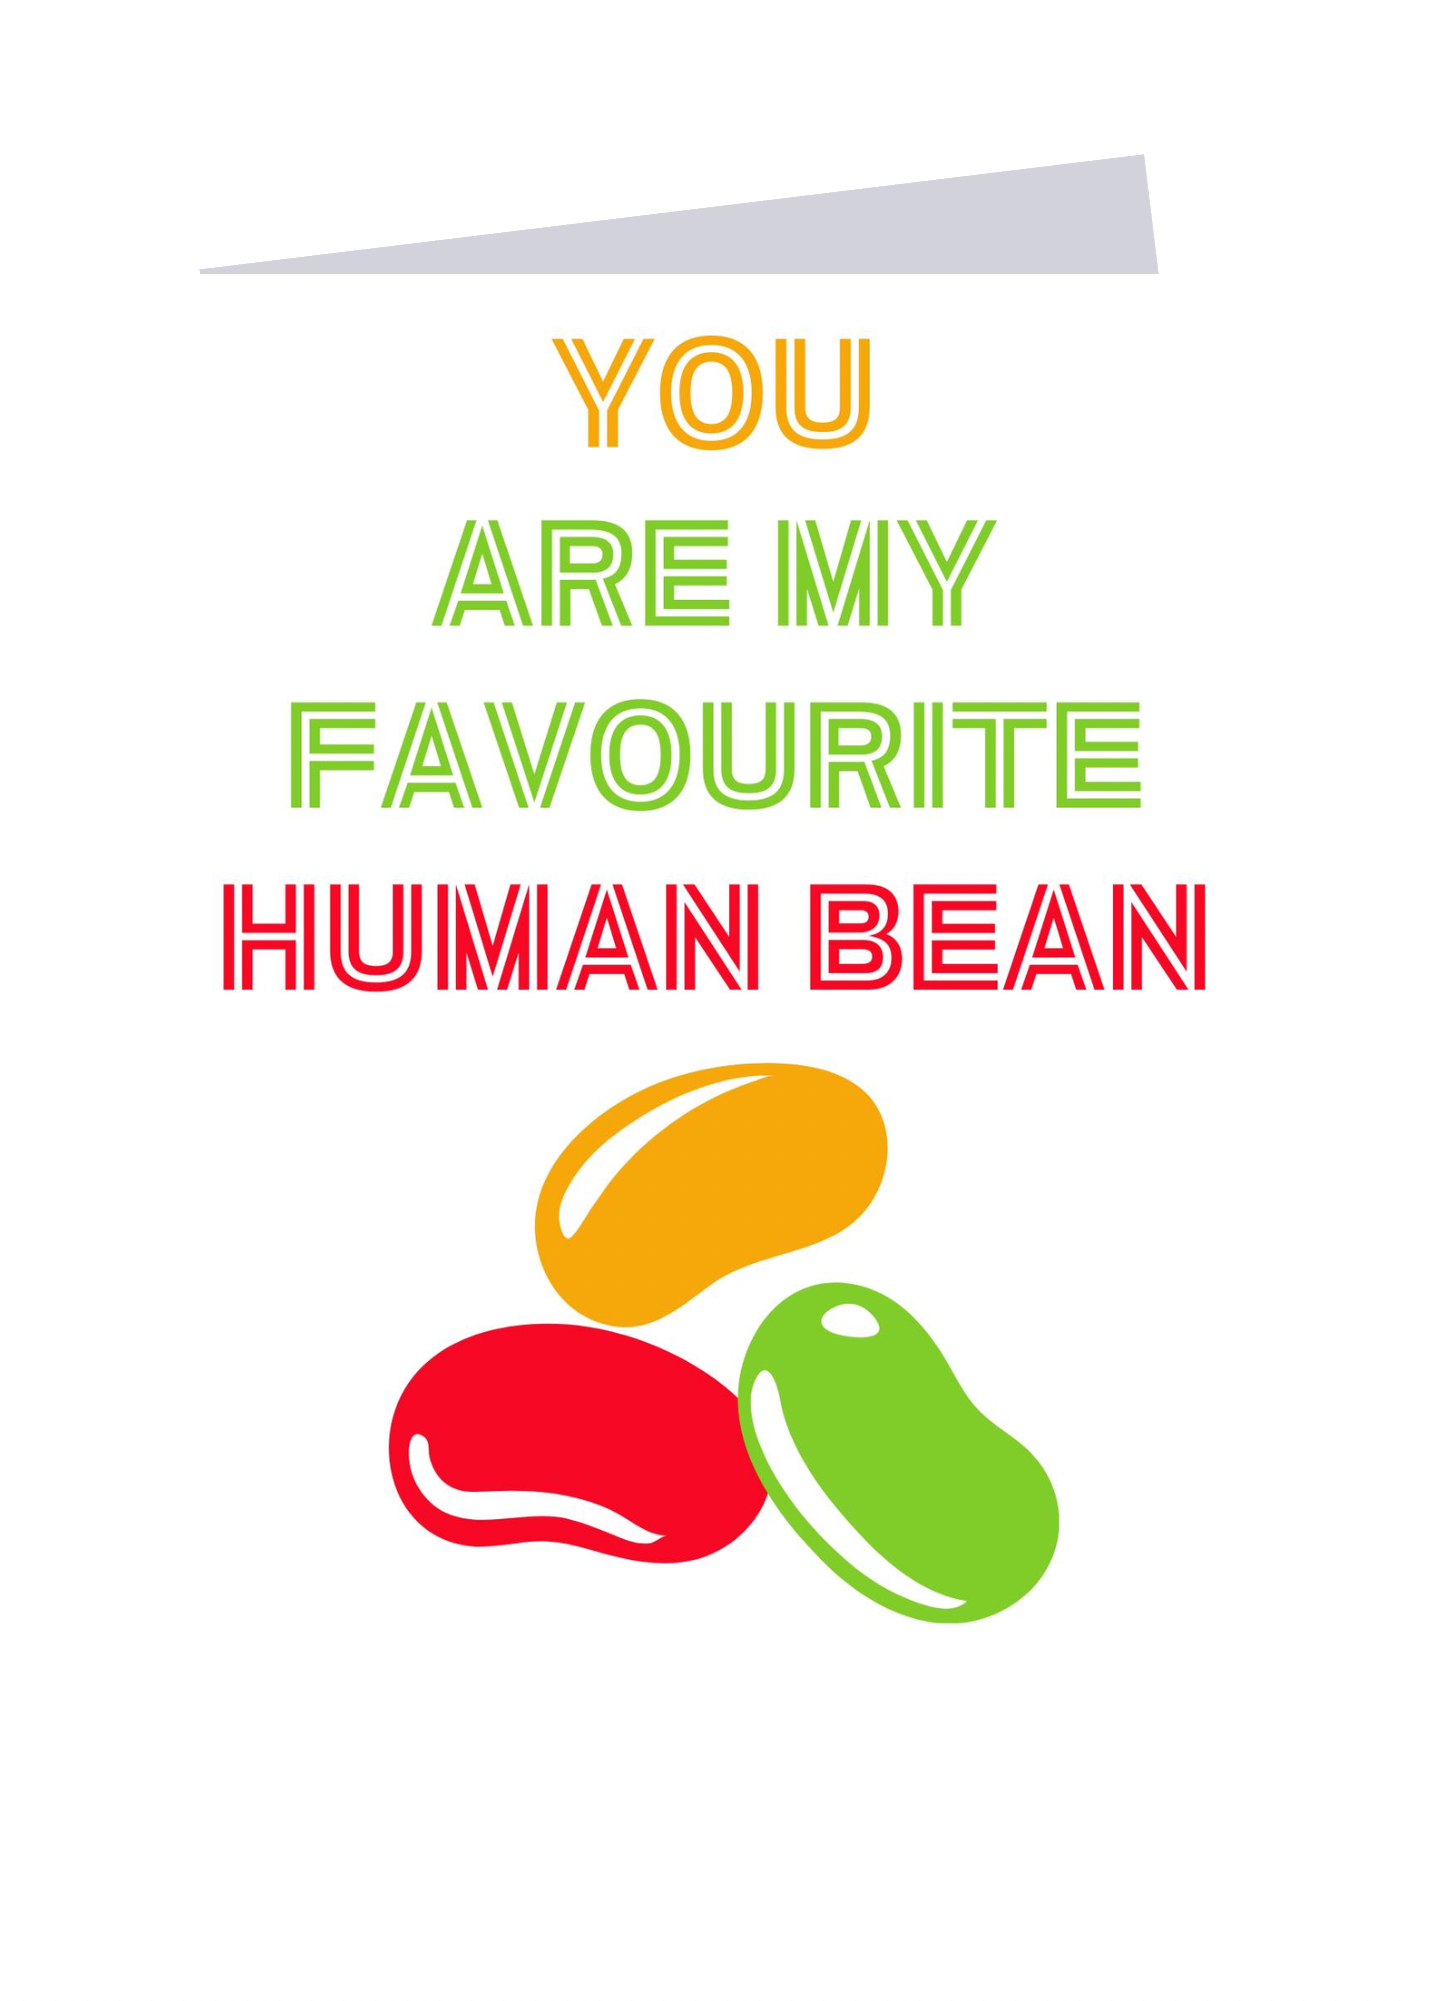 You are my favourite human bean!